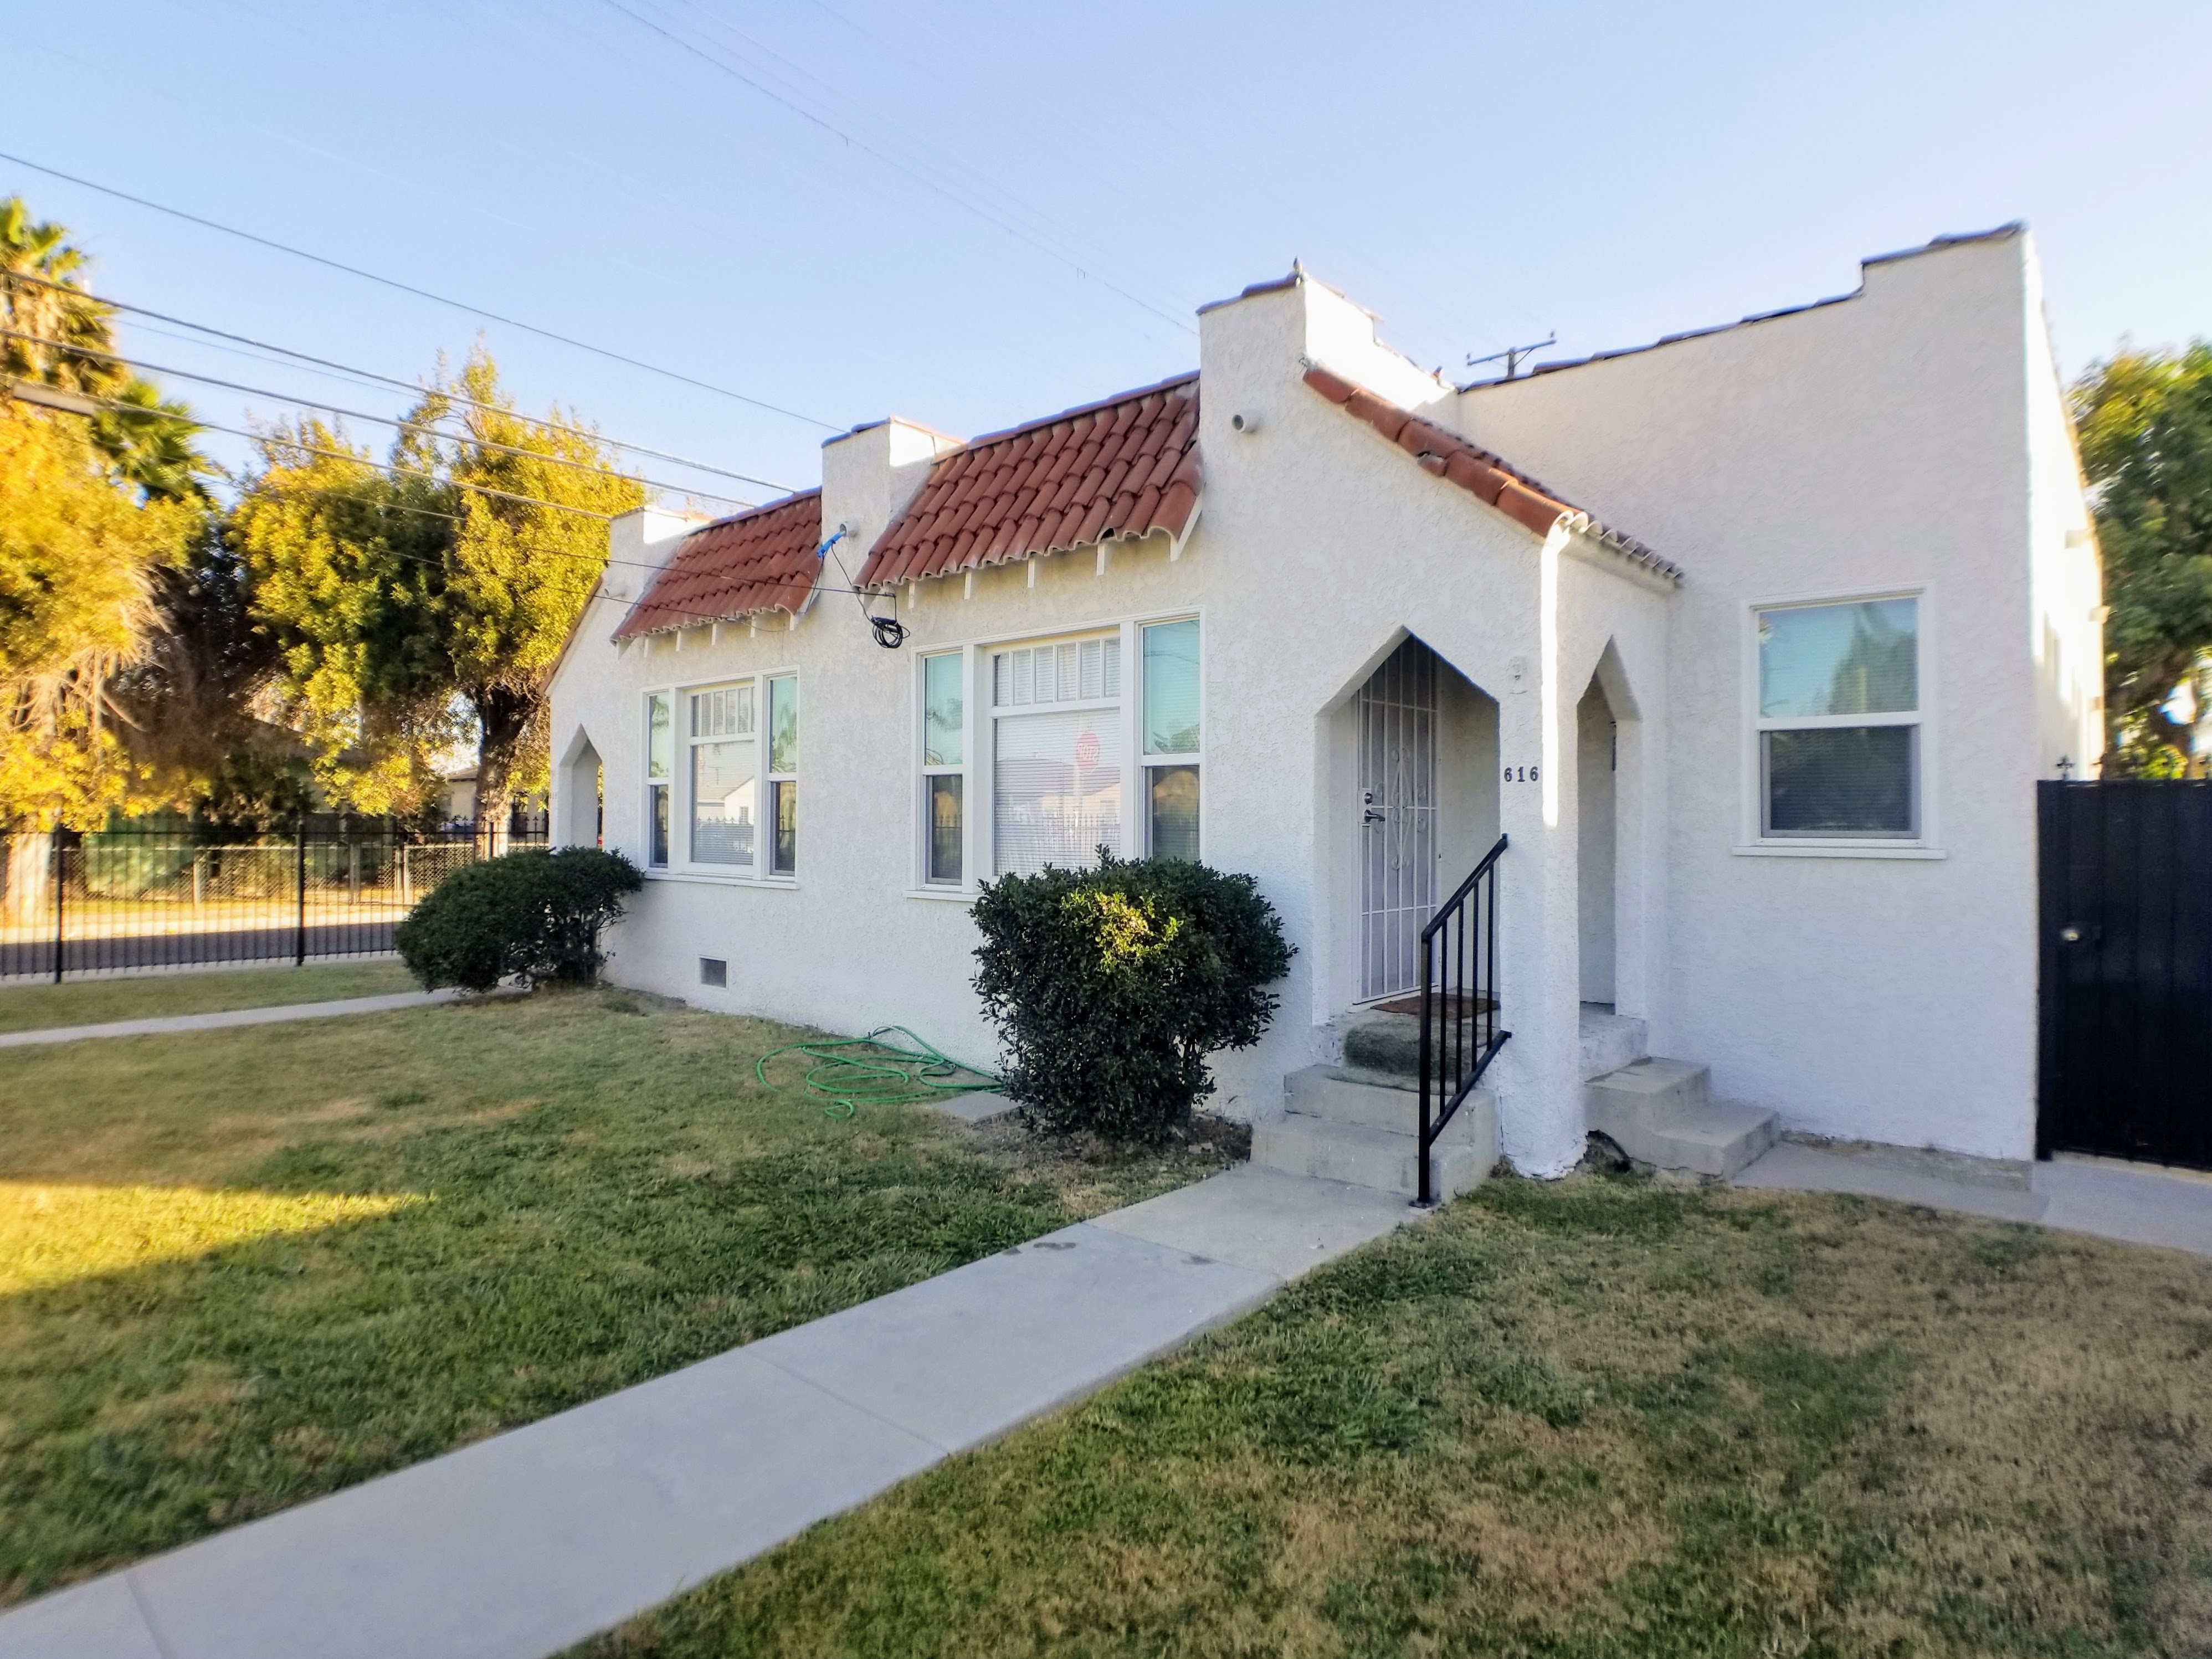 Property Listing For 03/09/21